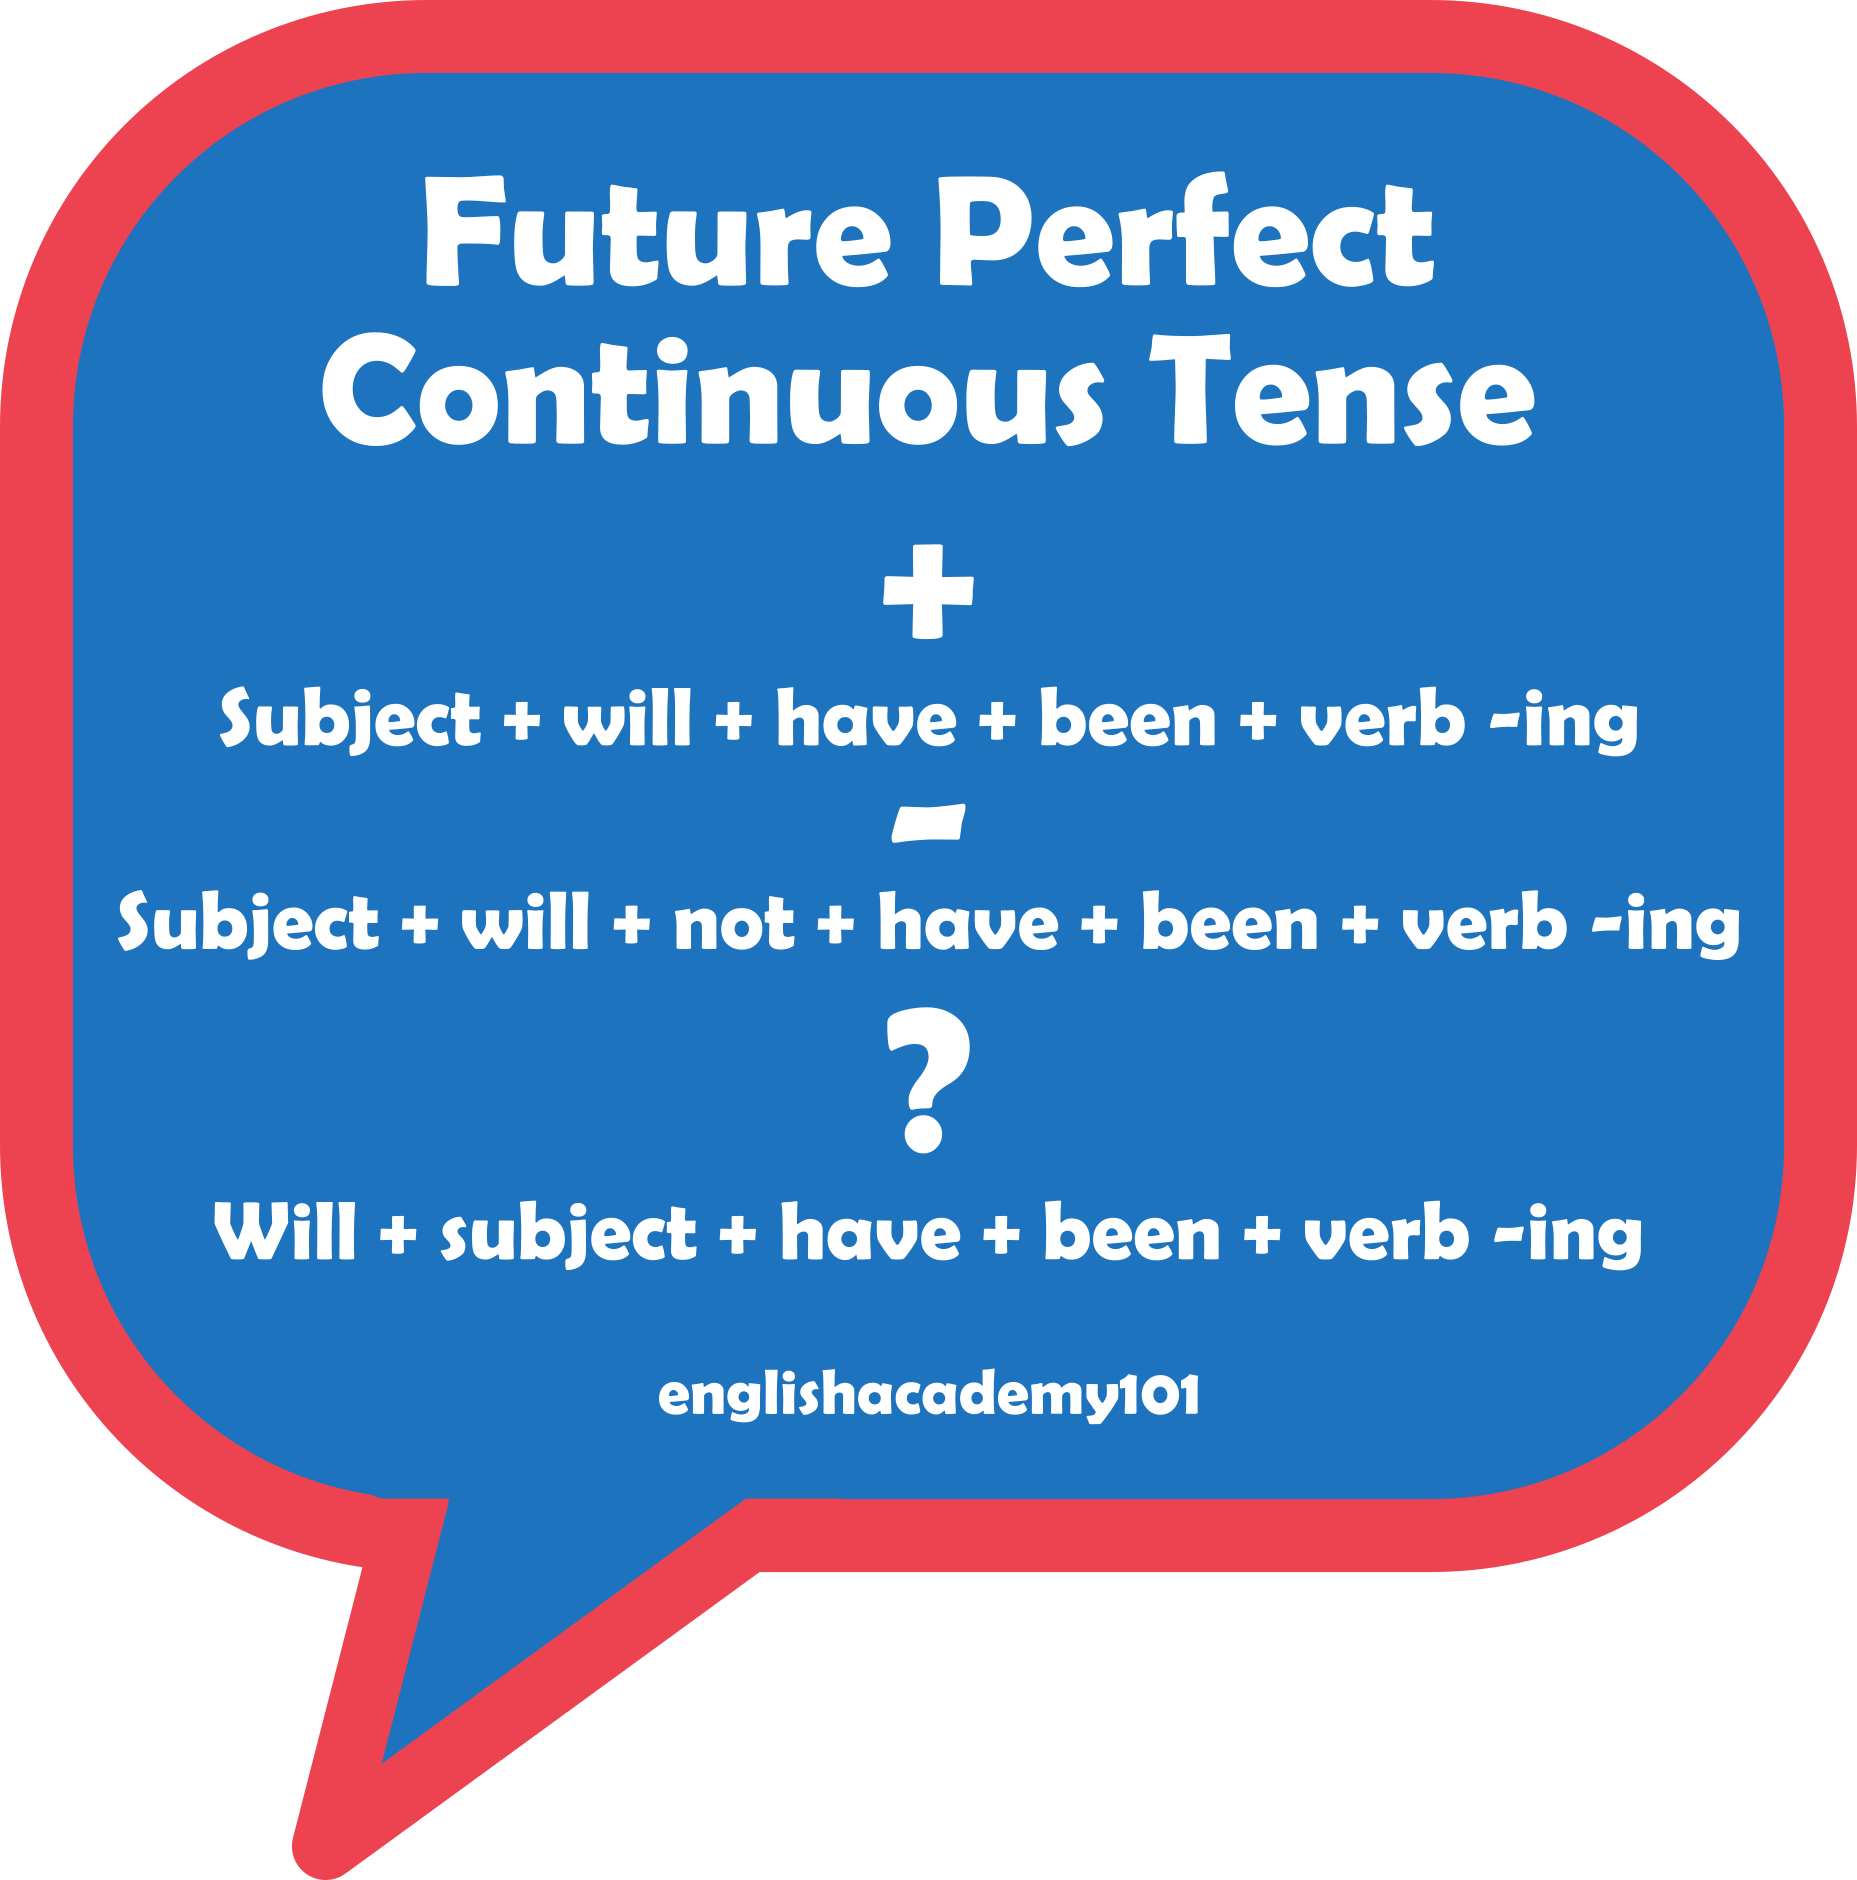 future-perfect-continuous-tense-archives-englishacademy101